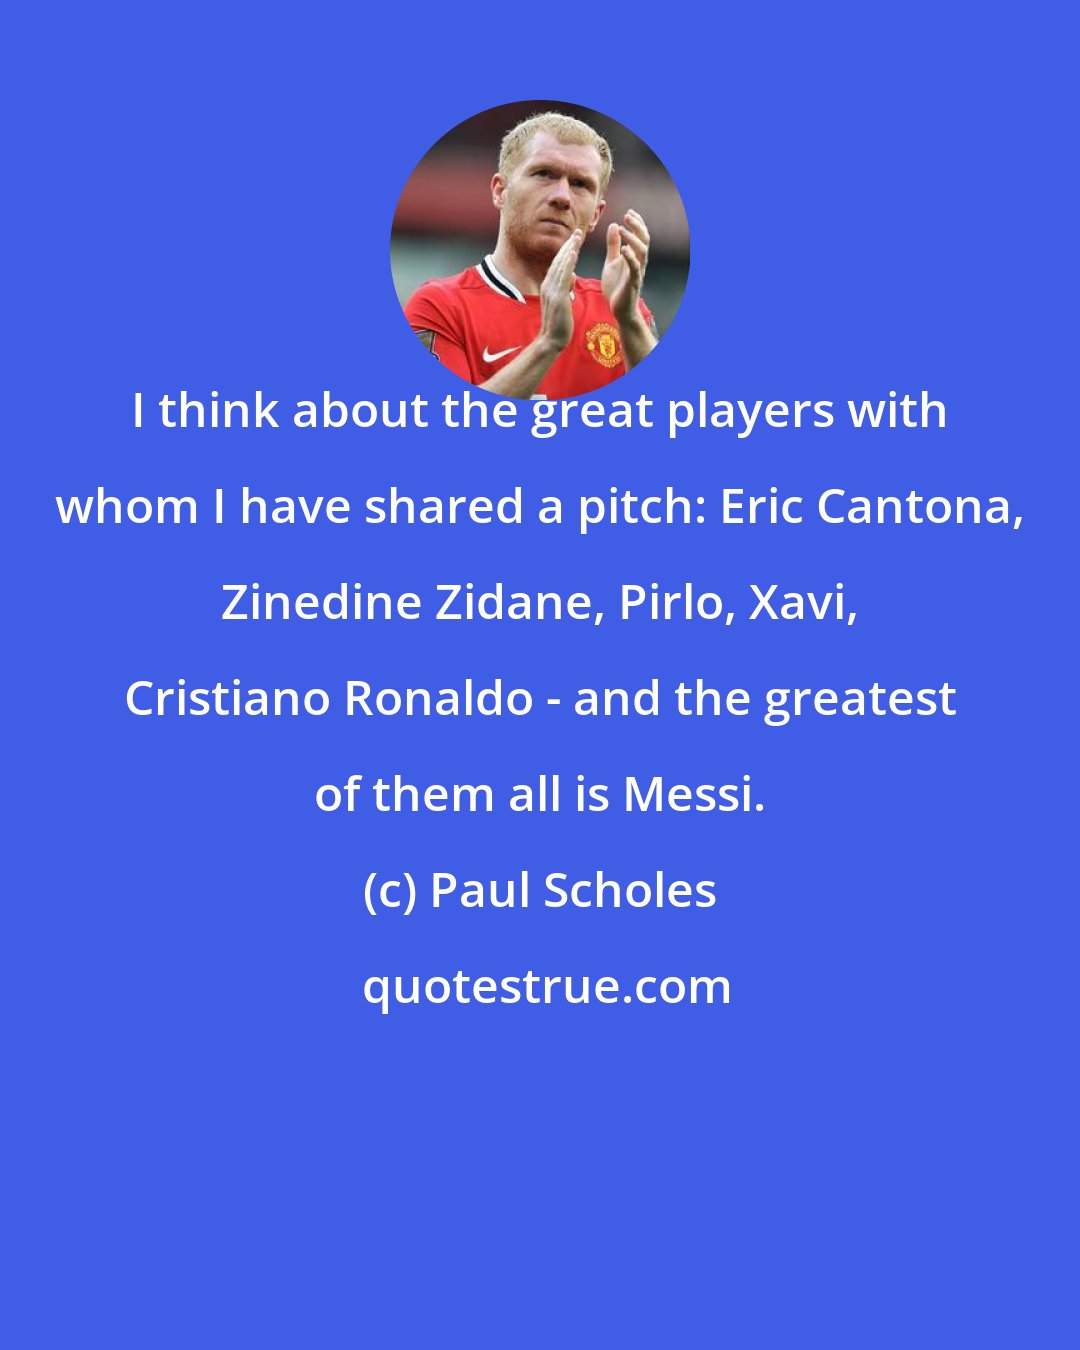 Paul Scholes: I think about the great players with whom I have shared a pitch: Eric Cantona, Zinedine Zidane, Pirlo, Xavi, Cristiano Ronaldo - and the greatest of them all is Messi.